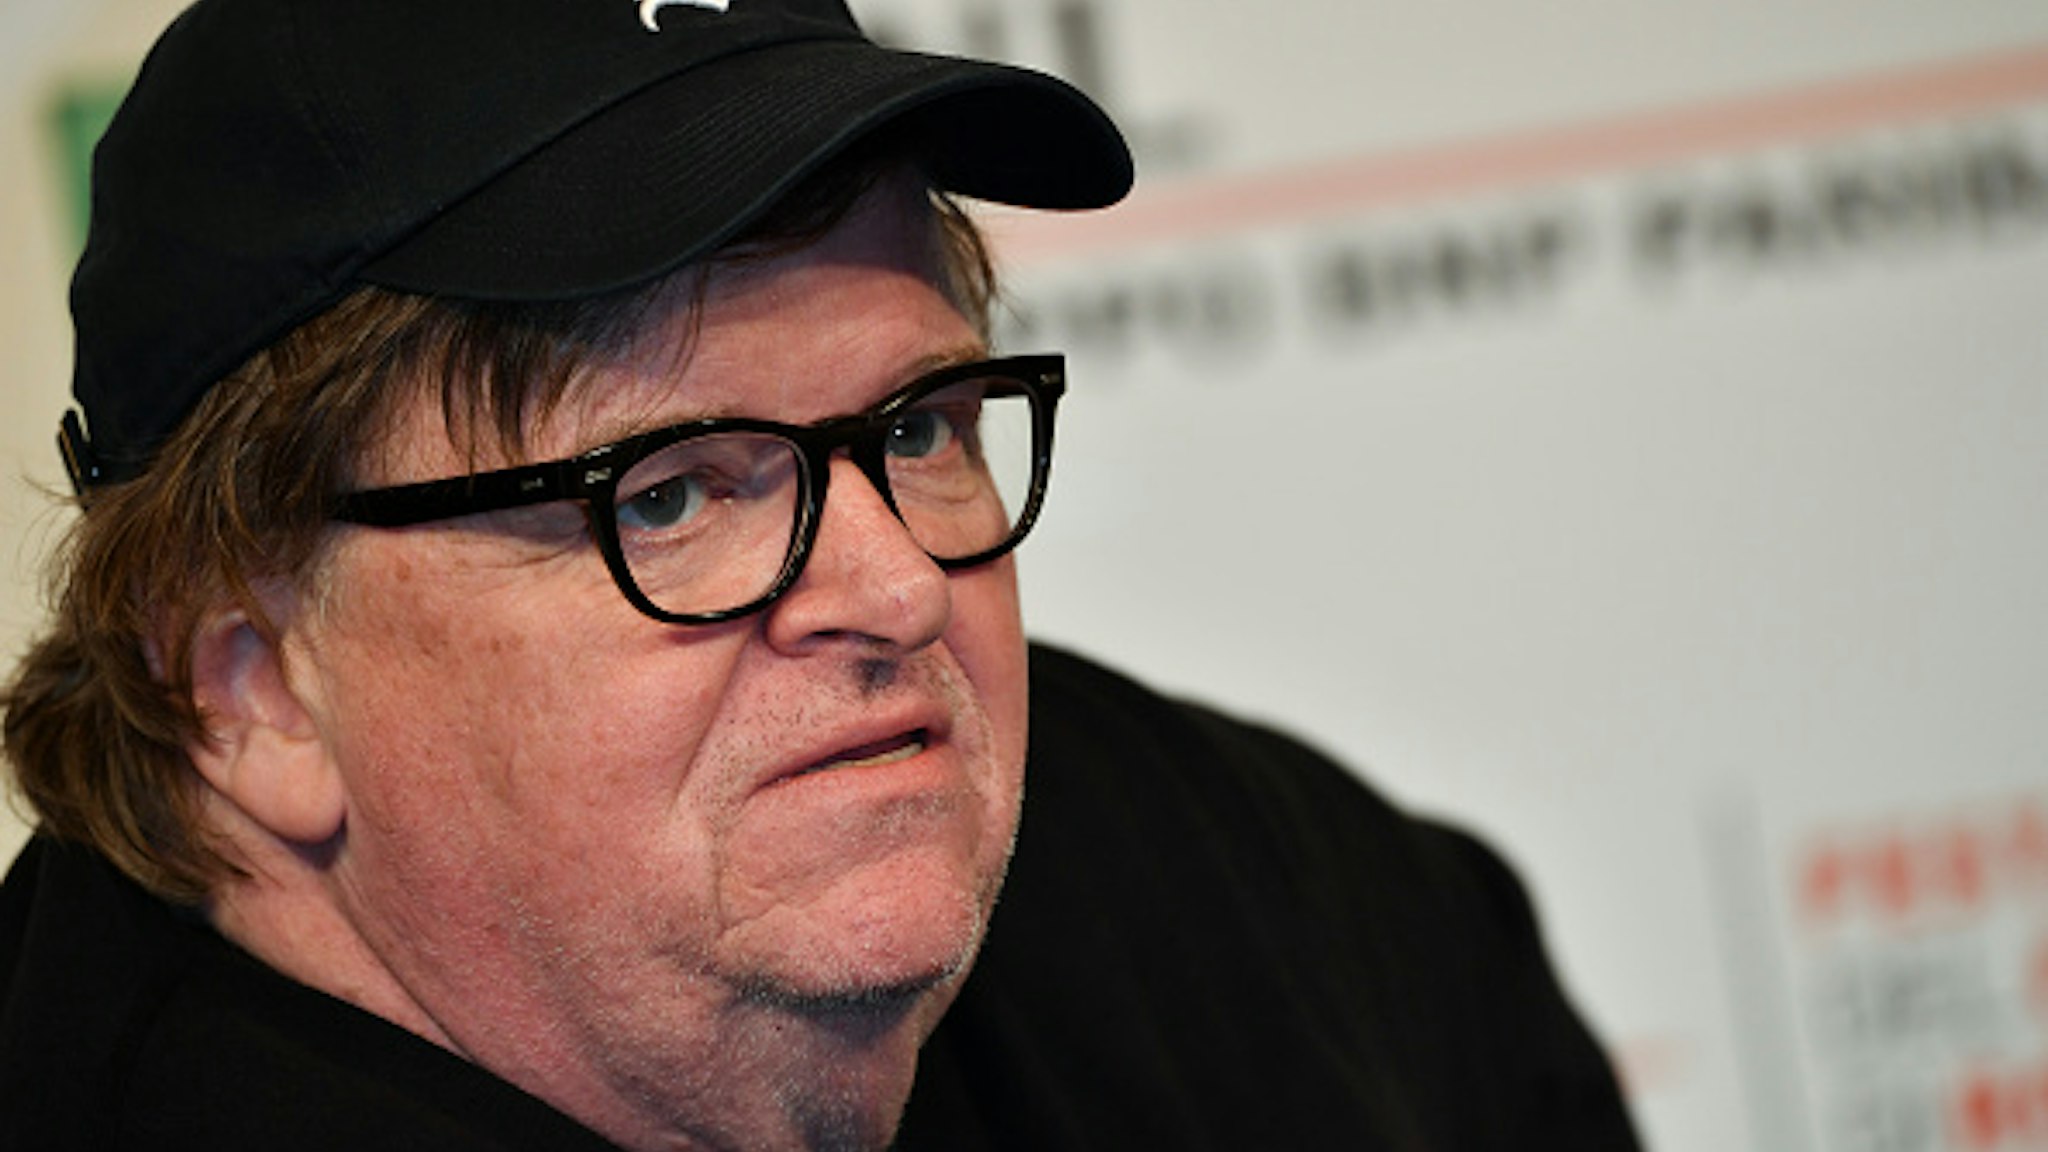 Rome Film Festival 2018, thirteenth edition. Director Michael Moore participates in a photocall during the Rome Film Festival at the Auditorium Parco della Musica. Rome, October 20th, 2018